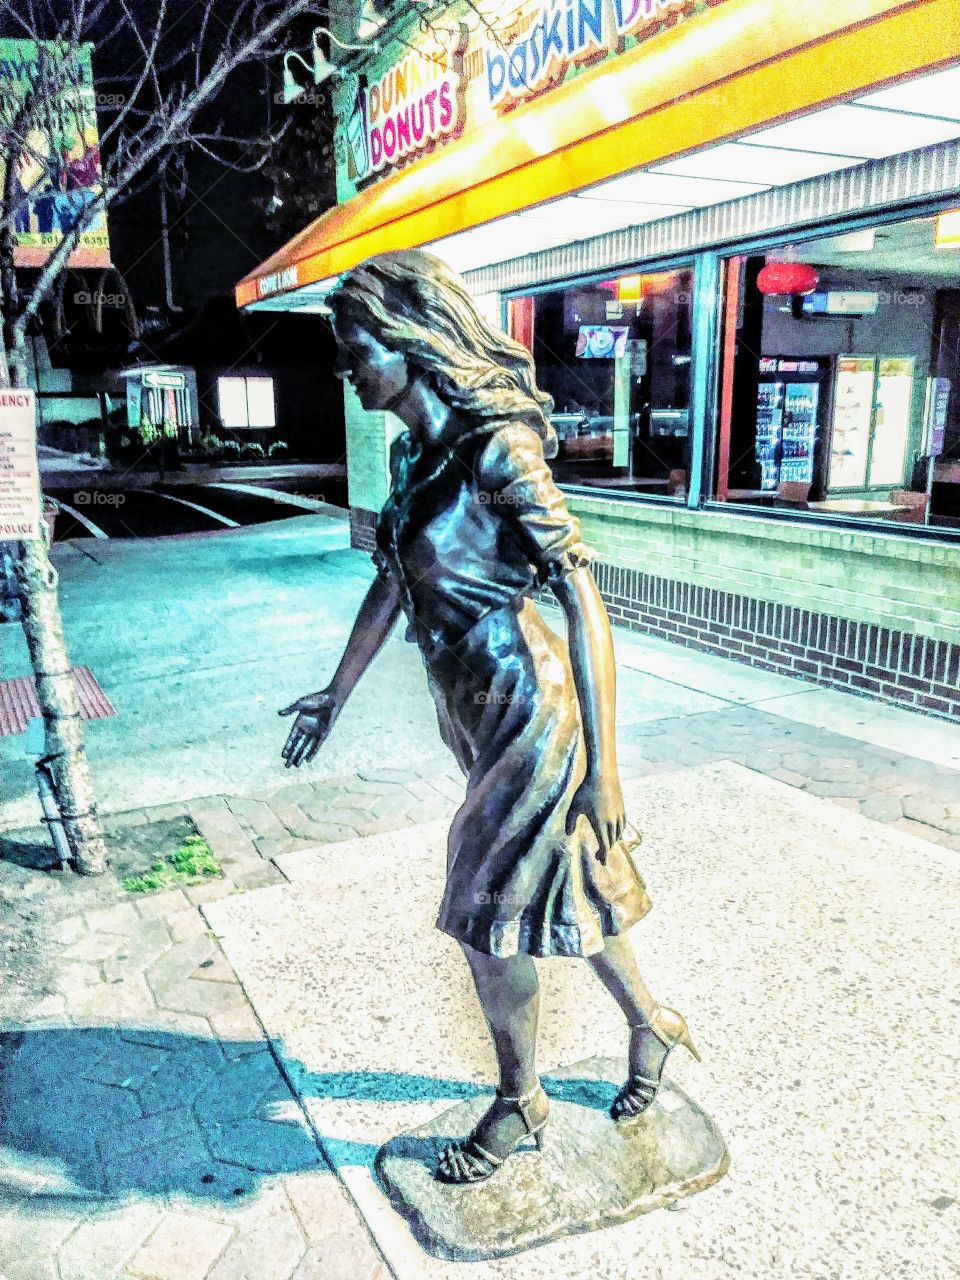 another bronze statue this one young woman on Broadway in Bayonne N.J.